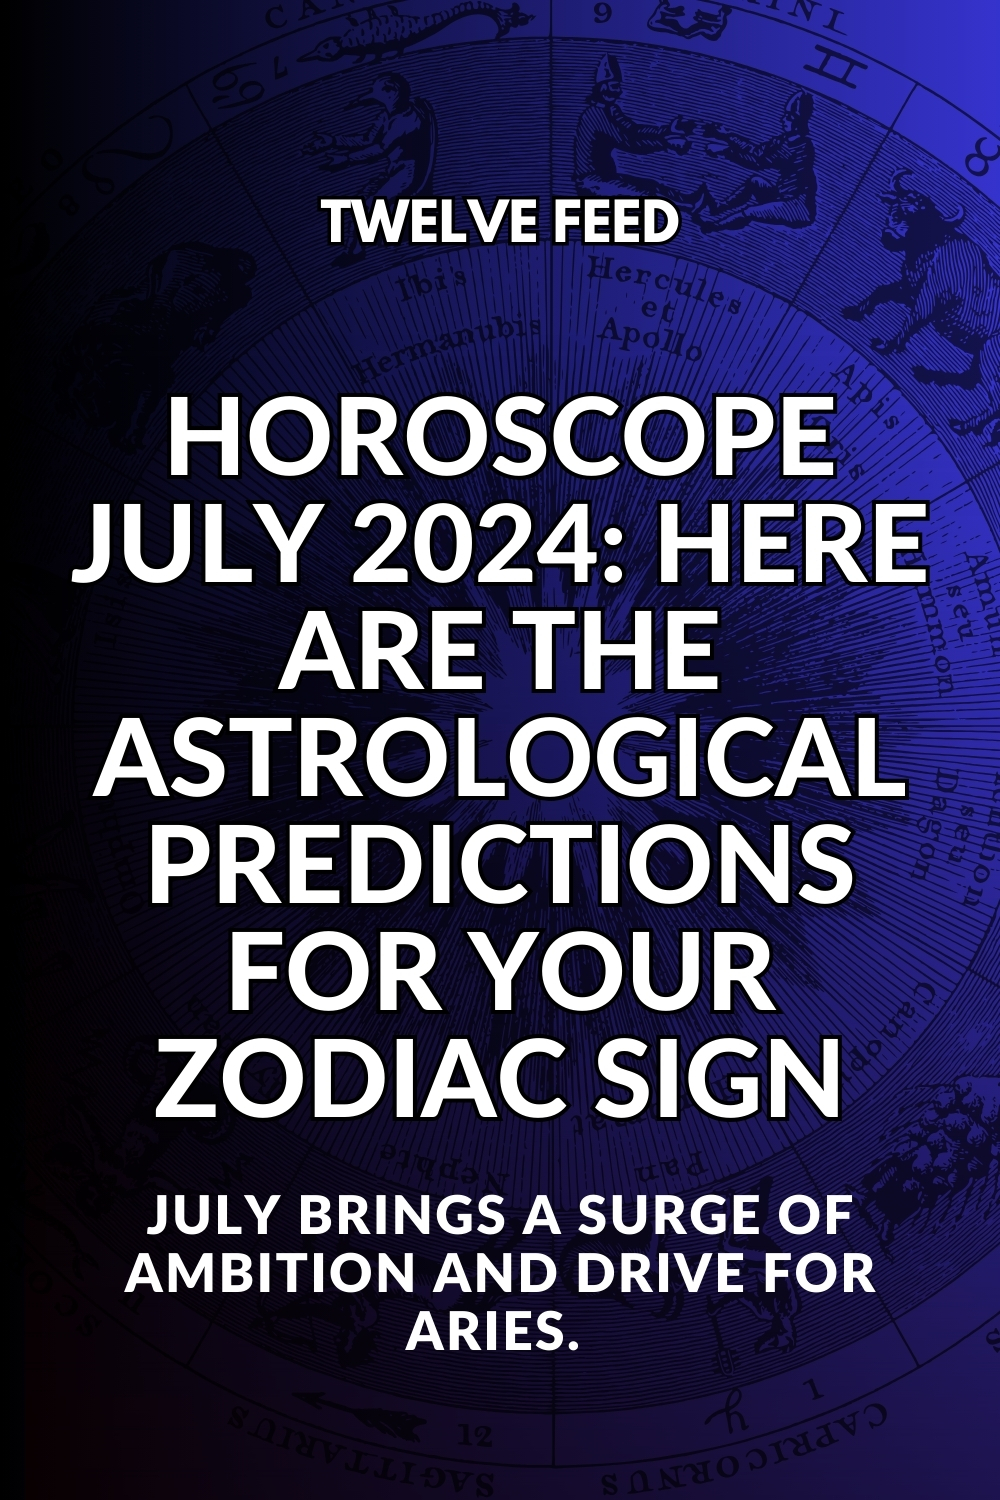 Horoscope July 2024: Here Are The Astrological Predictions For Your Zodiac Sign